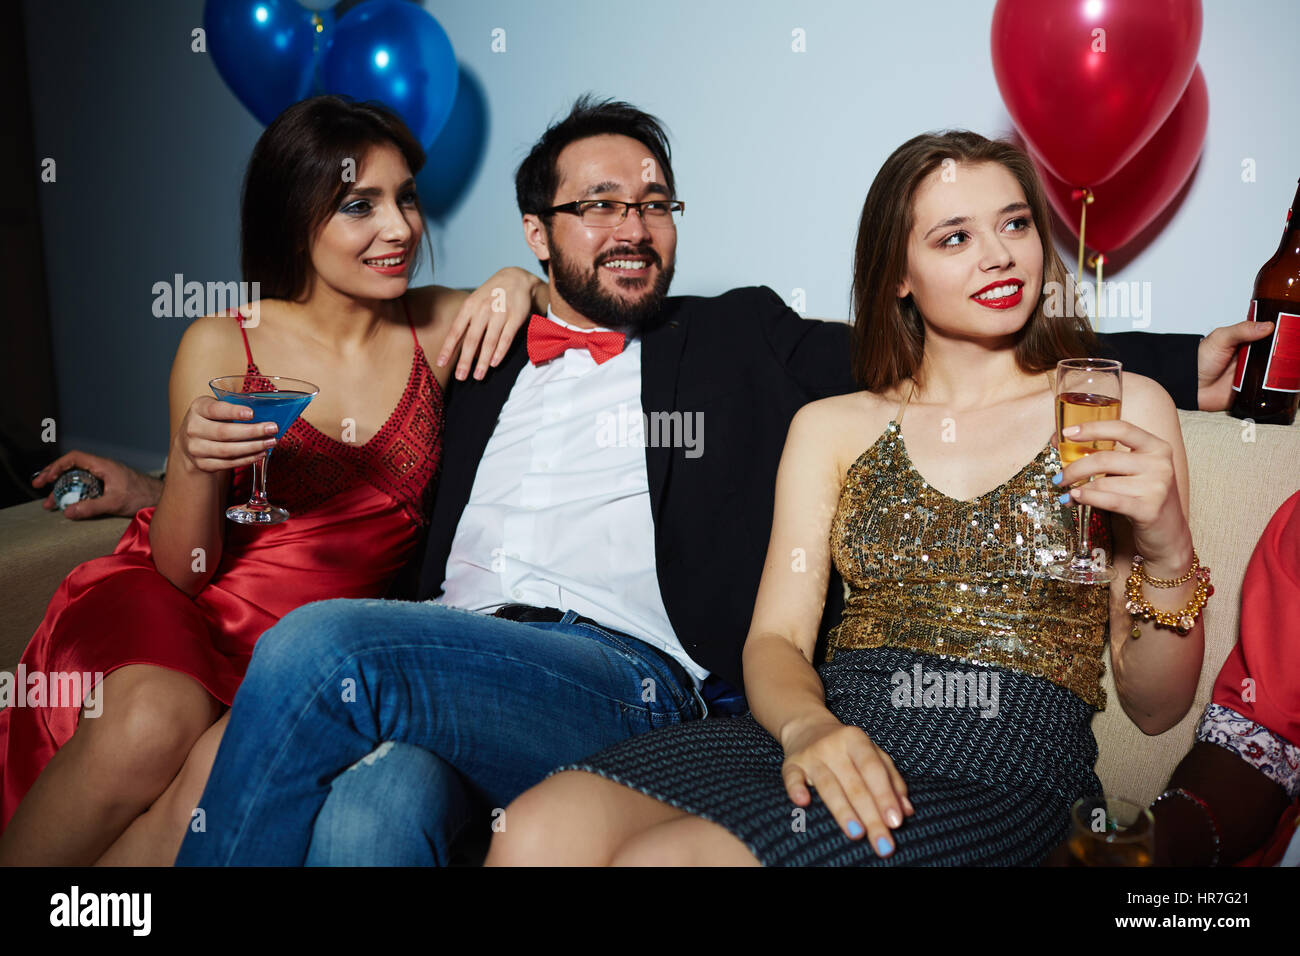 Male and female clubbers celebrating momentous event with alcohol: they sitting on couch and looking away joyfully Stock Photo